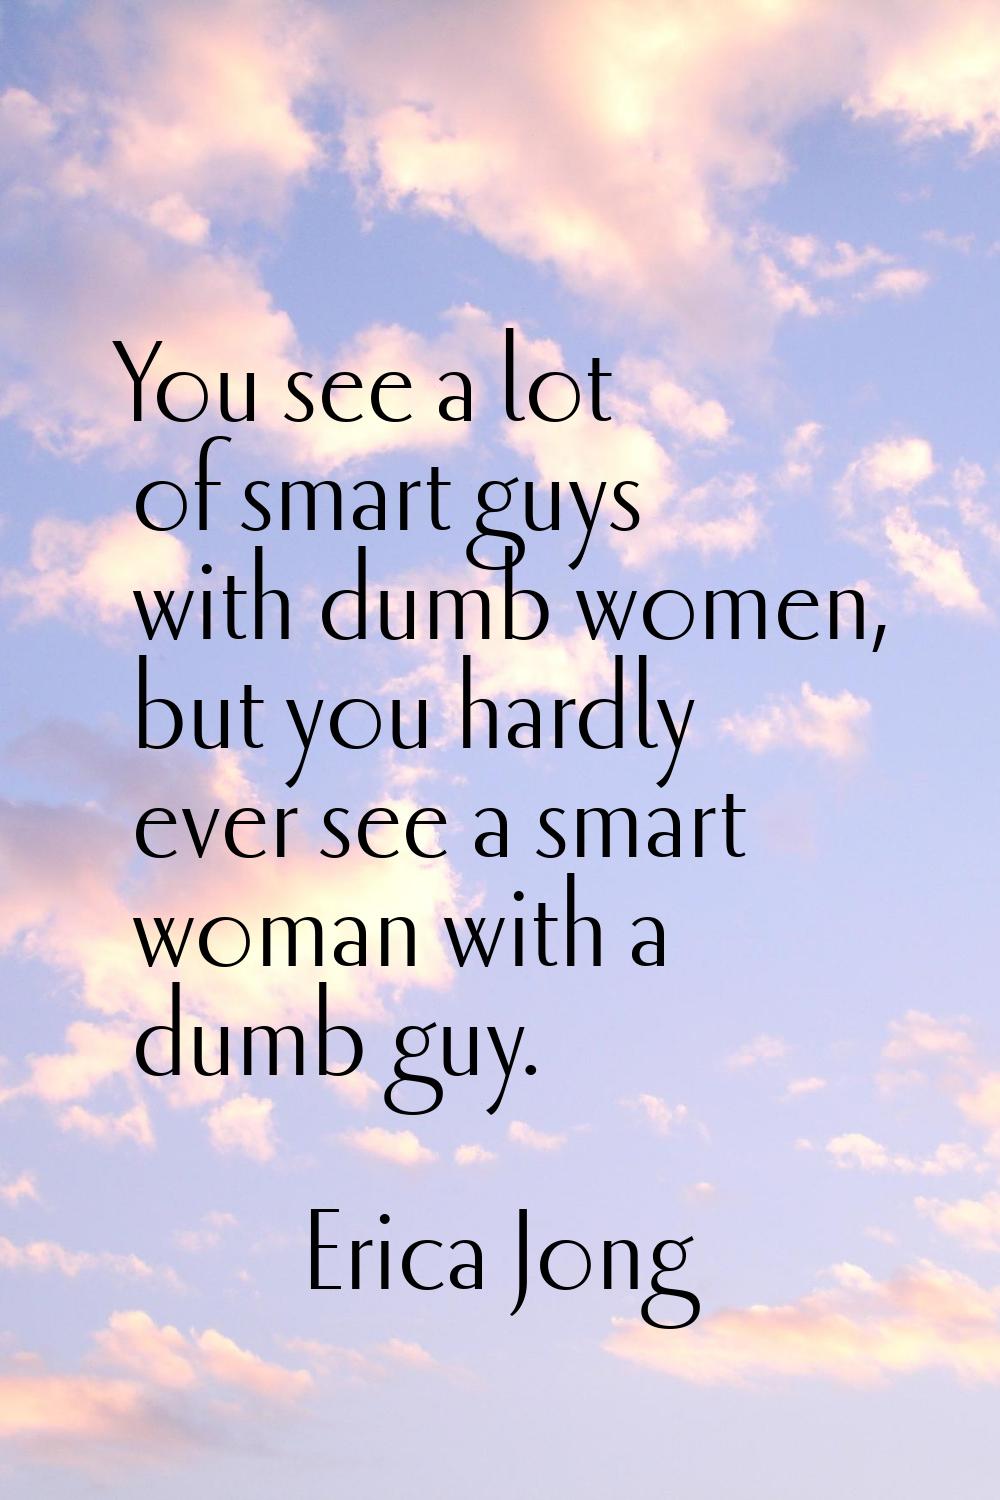 You see a lot of smart guys with dumb women, but you hardly ever see a smart woman with a dumb guy.